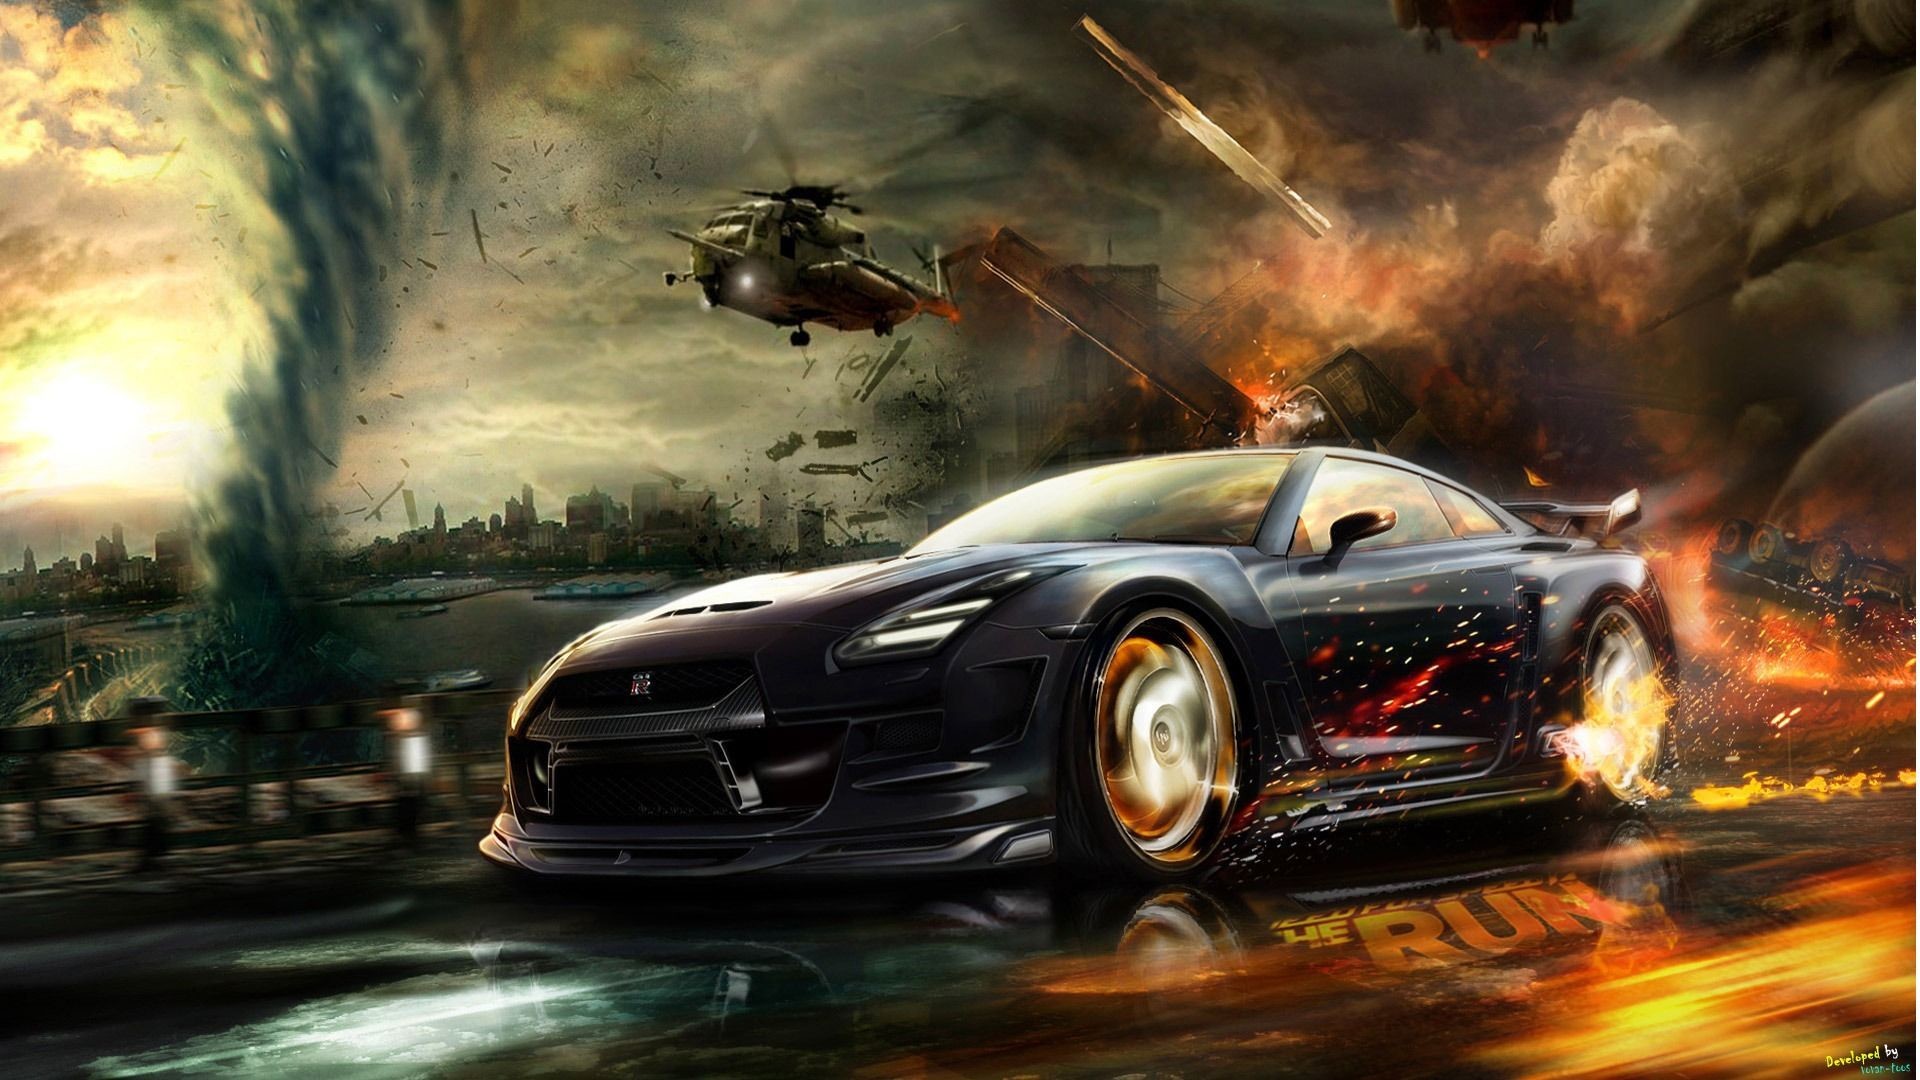 1920x1080 Need For Speed Wallpapers